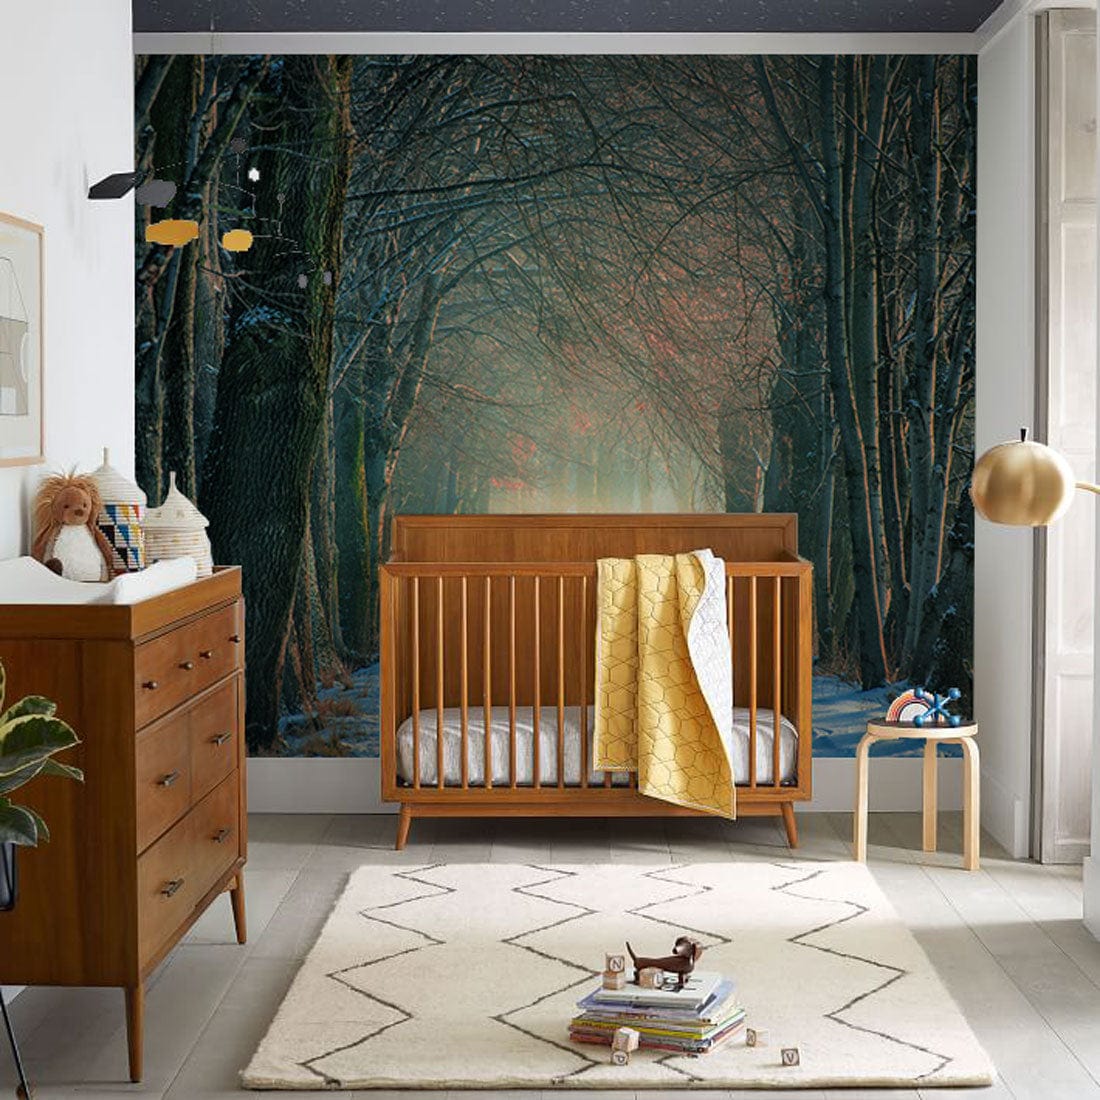 Wallpaper mural of a snowy path through the woods, ideal for a nursery